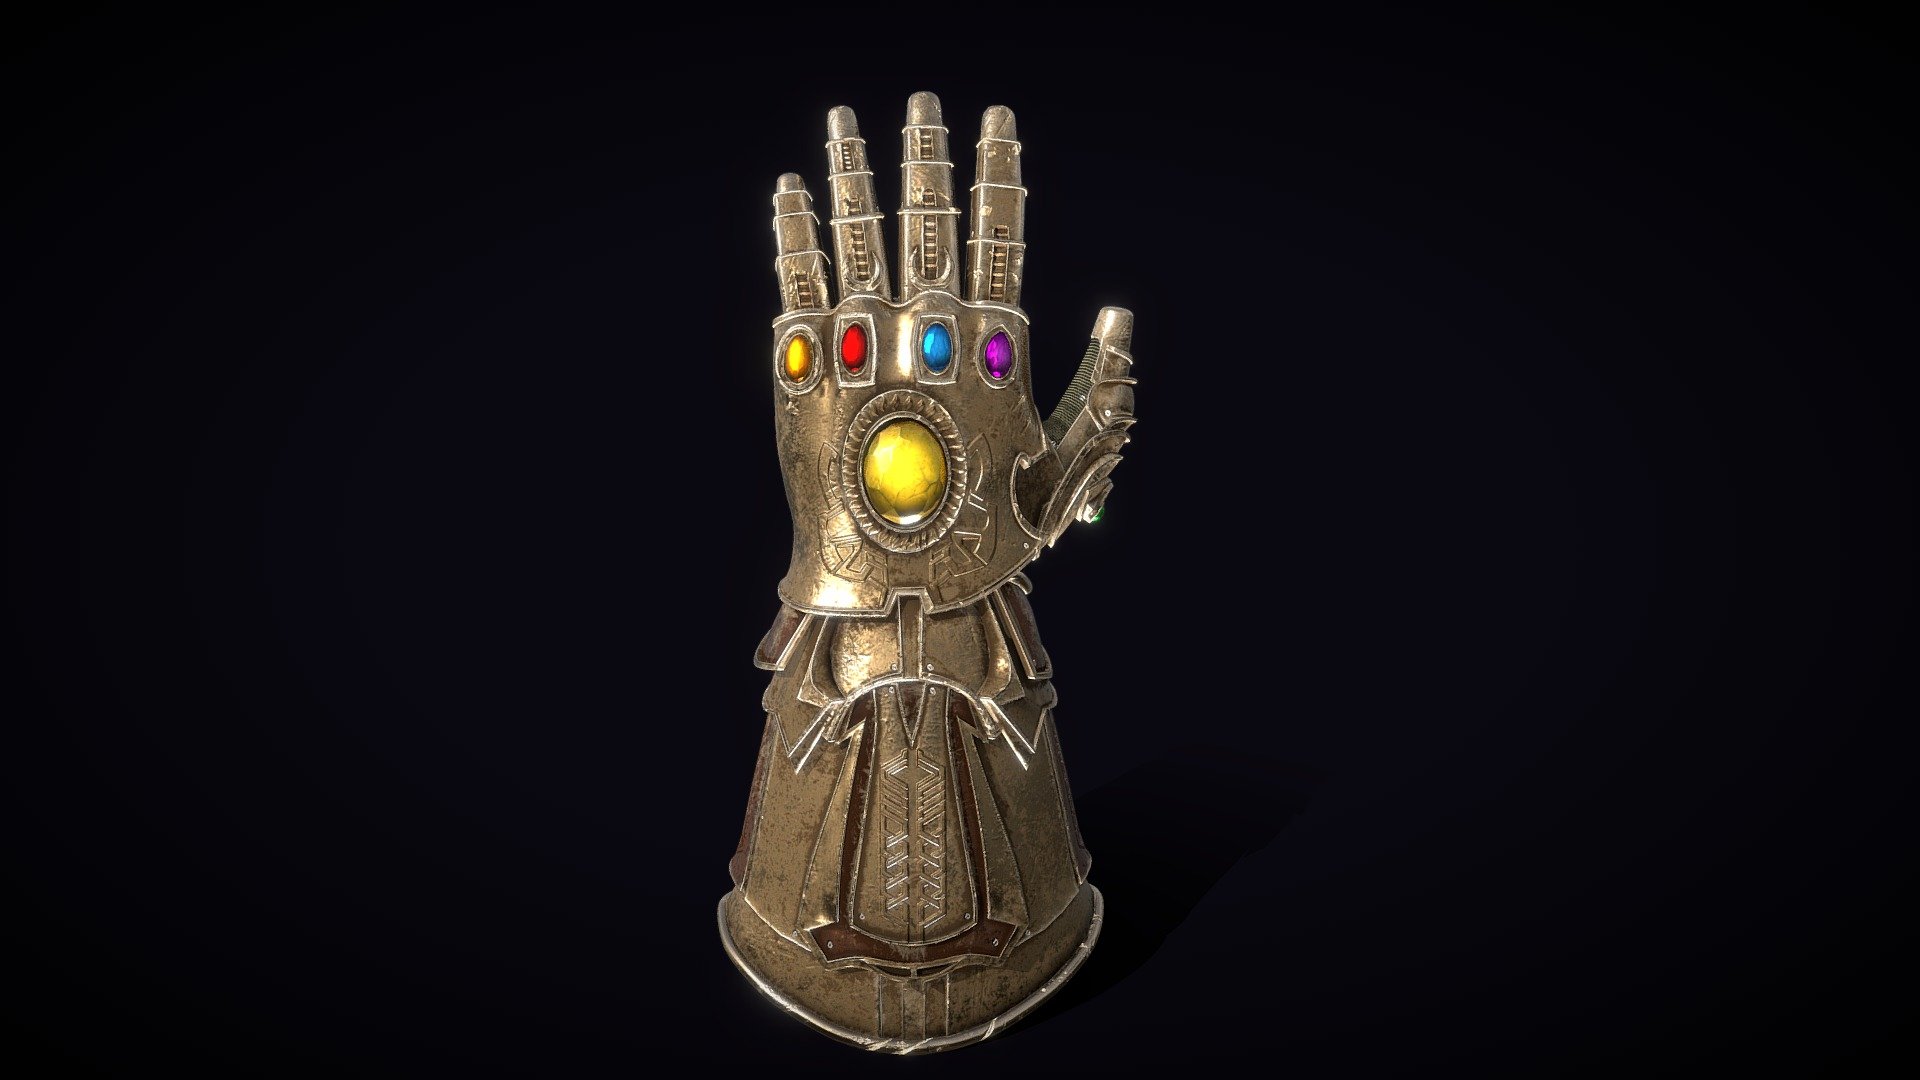 This is my Thanos Infinity Gauntlet, made in blender and textured in Substance Painter, hope you like it! Following the texturing course on the PRX 3D - Praxinoscopio channel on YouTube - Thanos Infinity Gauntlet by DGOBR - 3D model by dgonlinebr 3d model